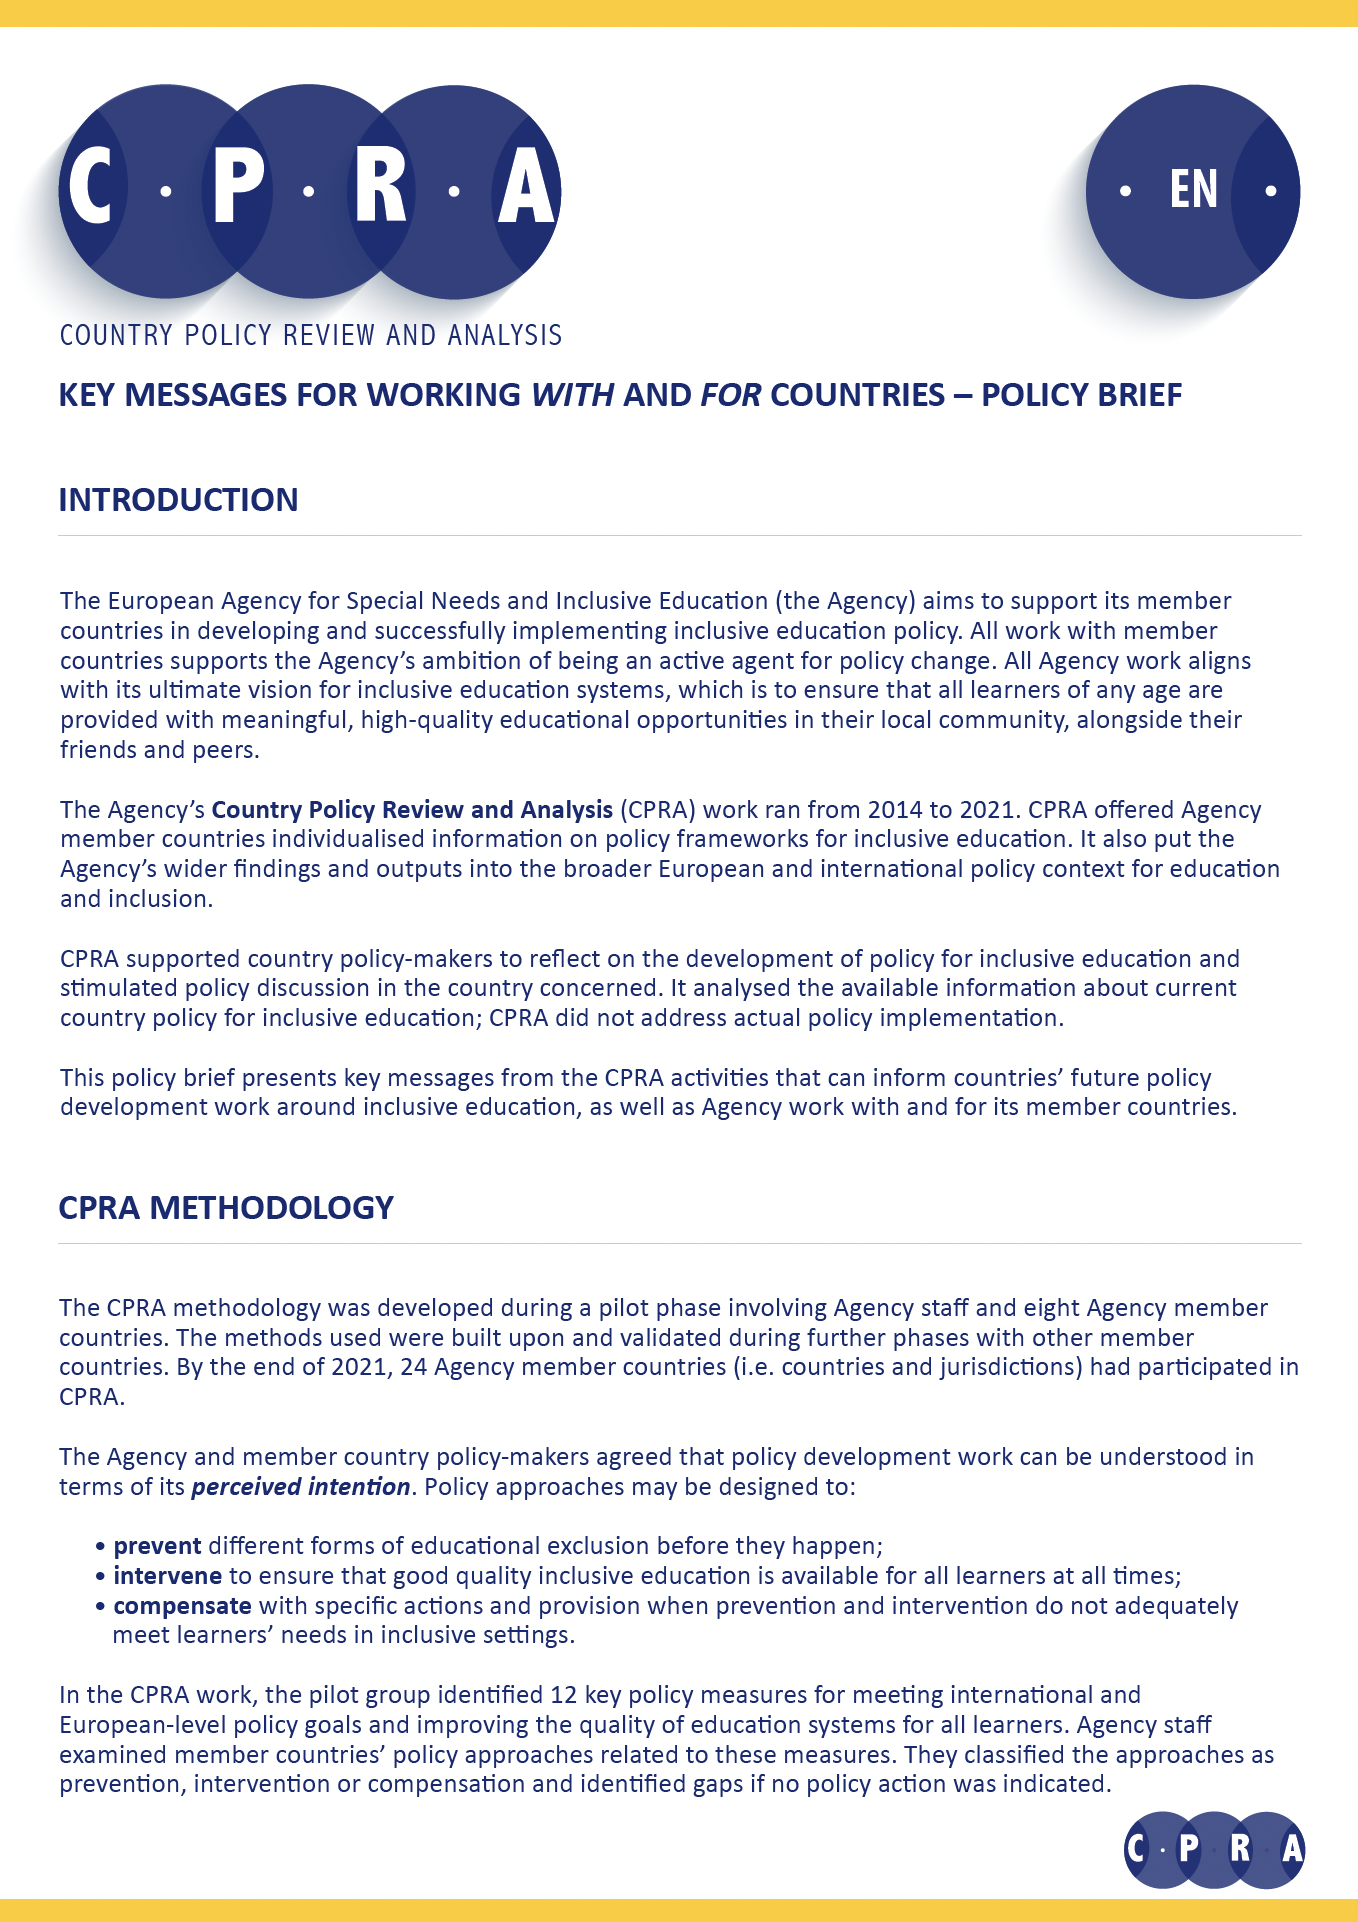 Country Policy Review and Analysis: Key messages for working with and for countries – Policy Brief